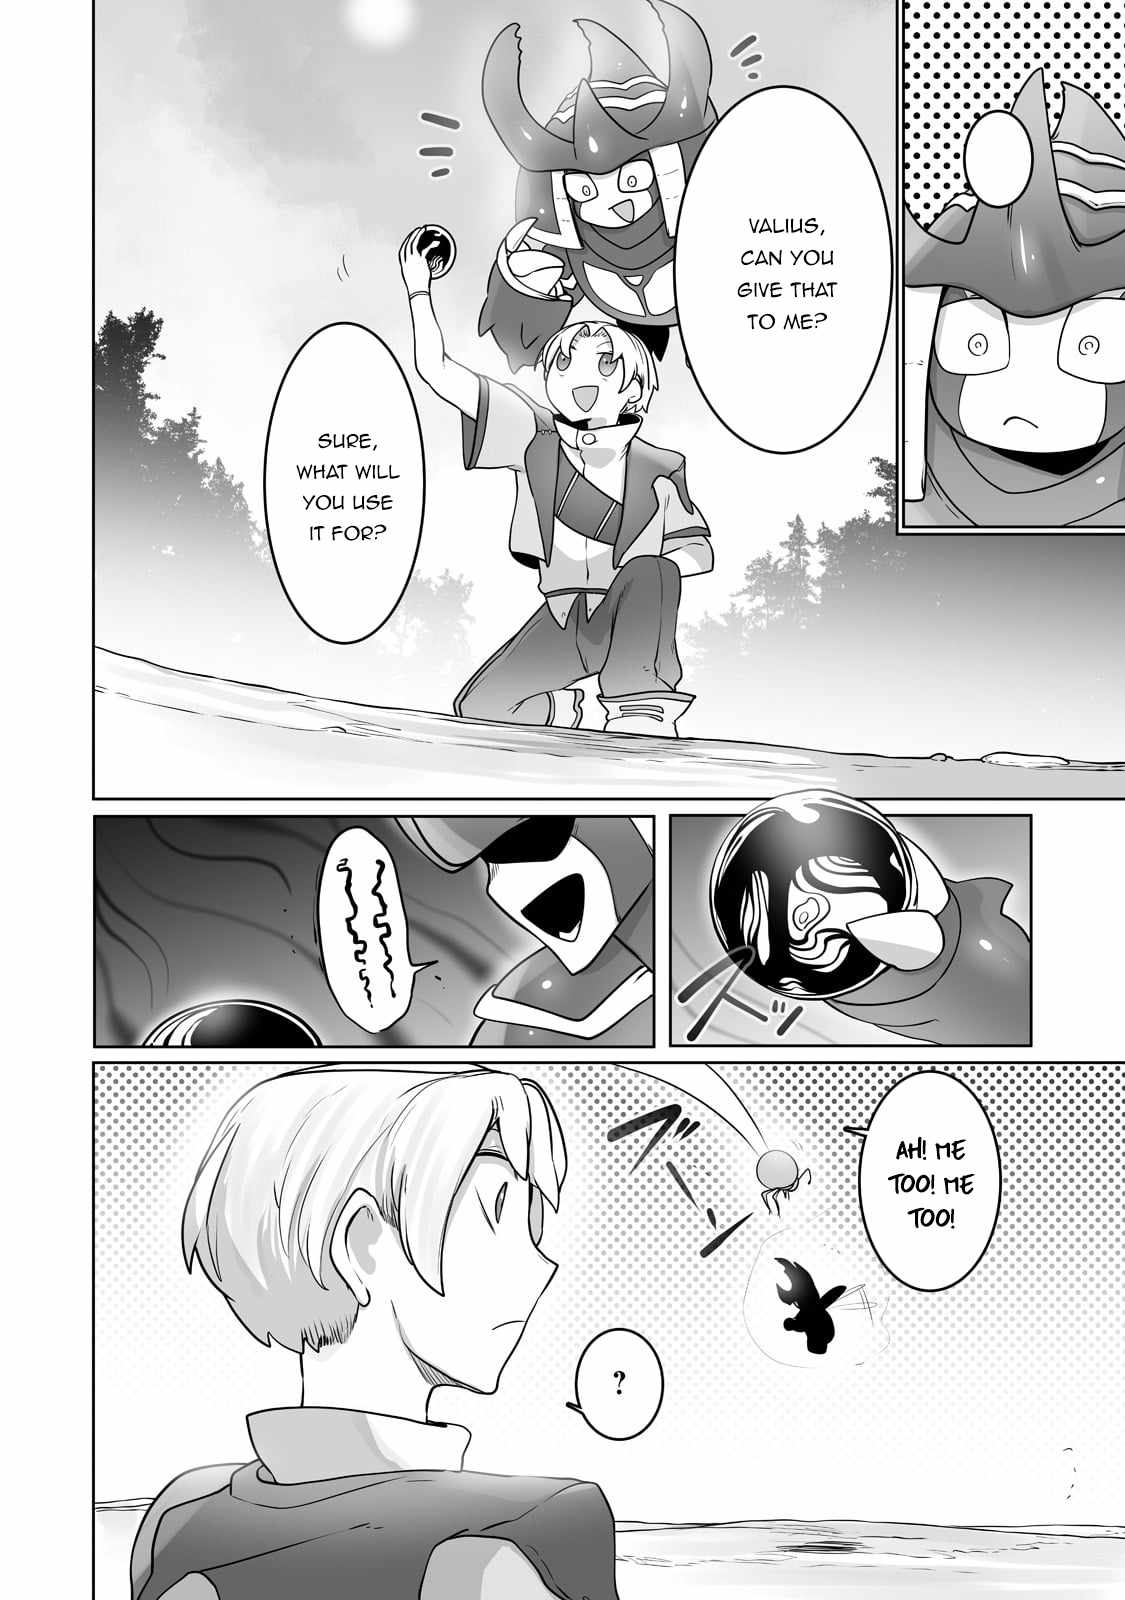 The Useless Tamer Will Turn into the Top Unconsciously by My Previous Life Knowledge Chapter 24-eng-li - Page 12